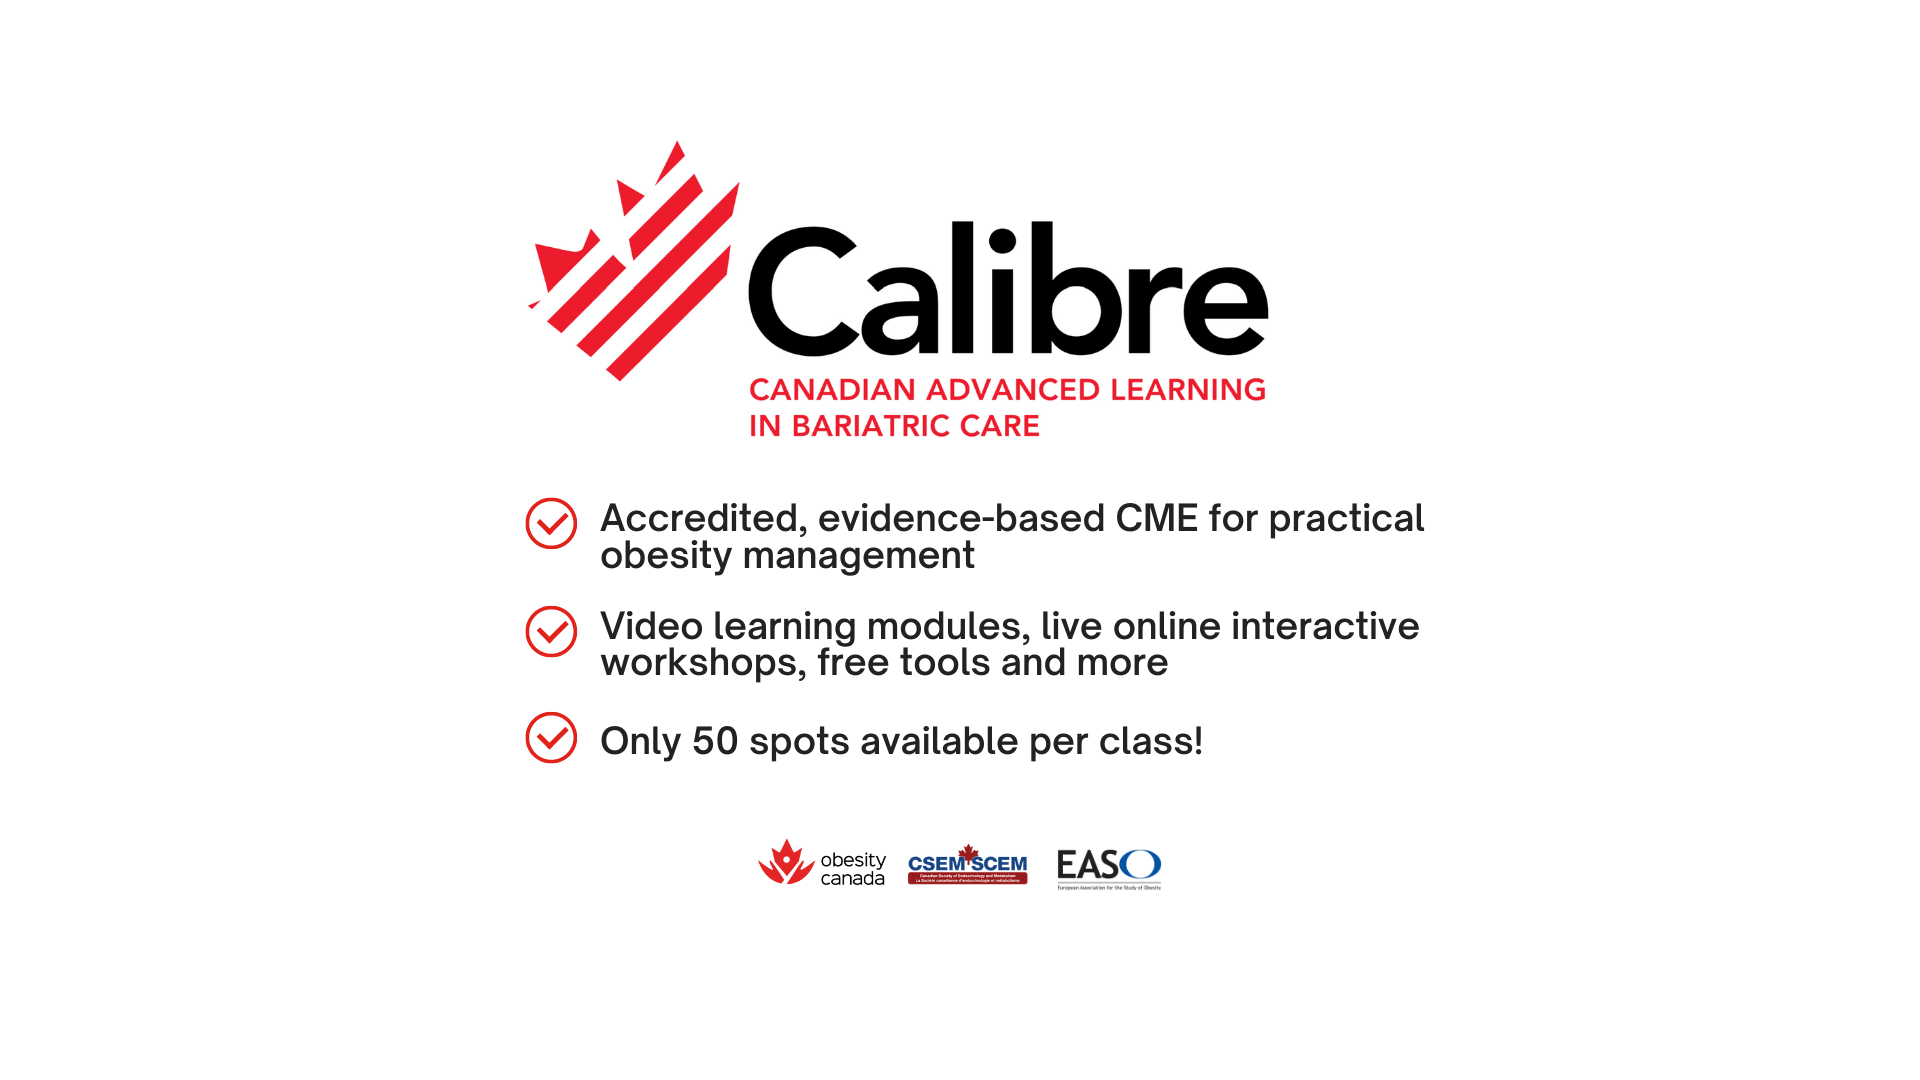 Logo for cailibre canadian bariatric care featuring services: accredited evidence-based cme, online interactive learning, limited class spots. includes obesity canada and easo logos.